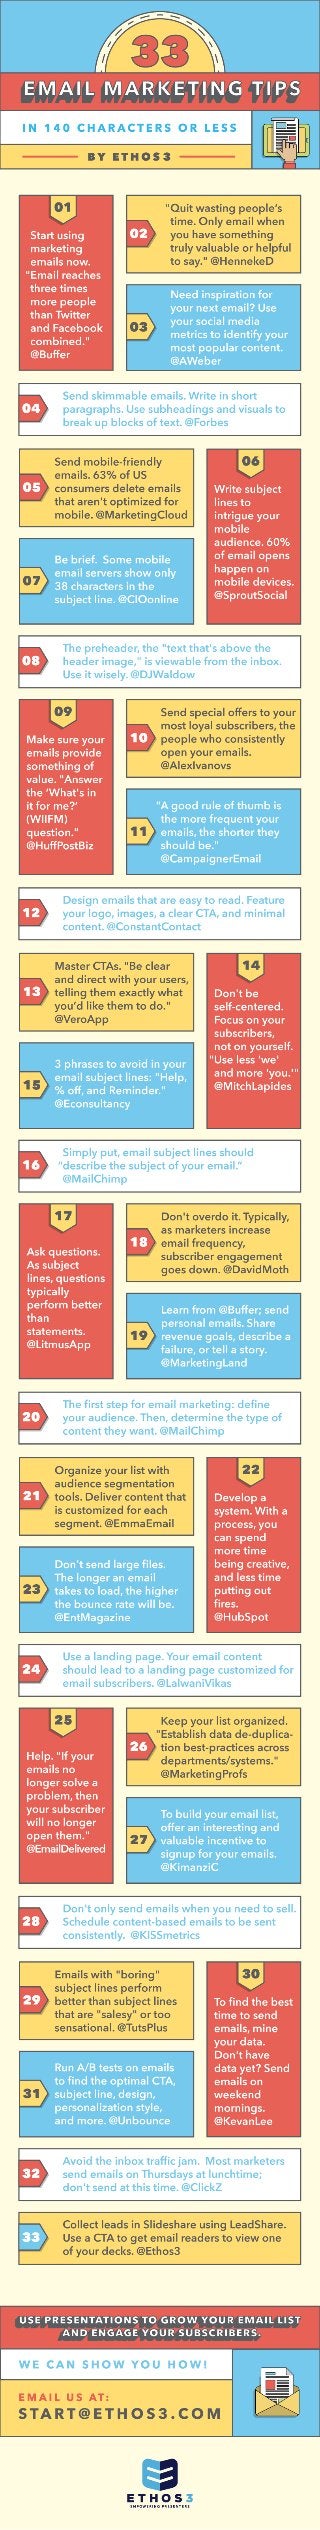 33 Email Marketing Tips, in 140 characters or less